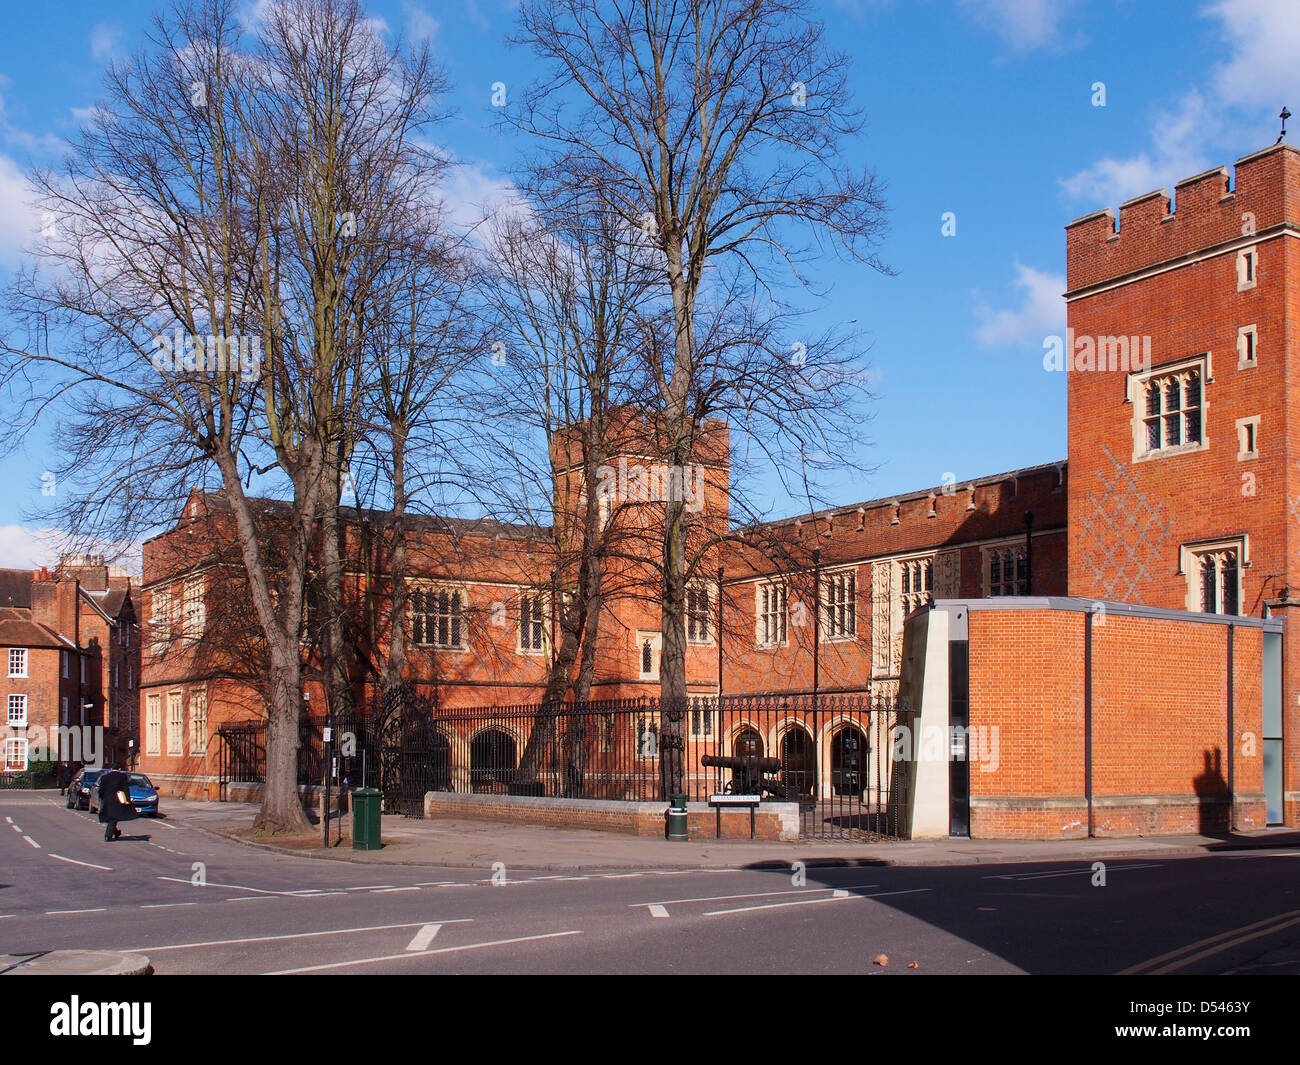 Historical famous college buildings of Eton College Royal Berkshire Stock Photo